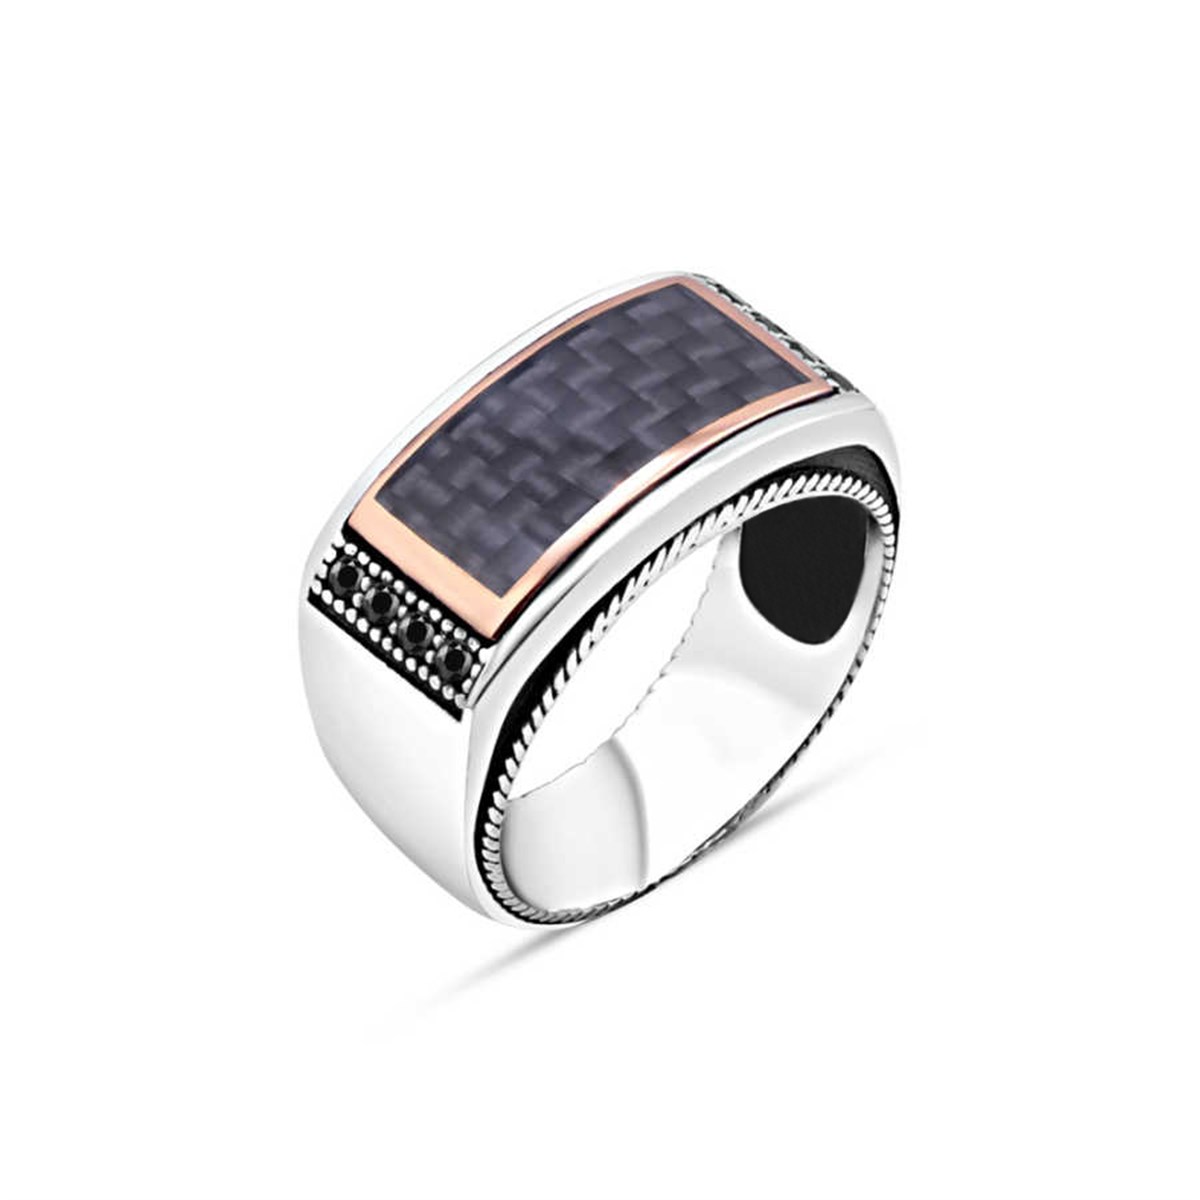 Silver Men's Ring with Tiny Black Zircon Stone on the Carbon Edge